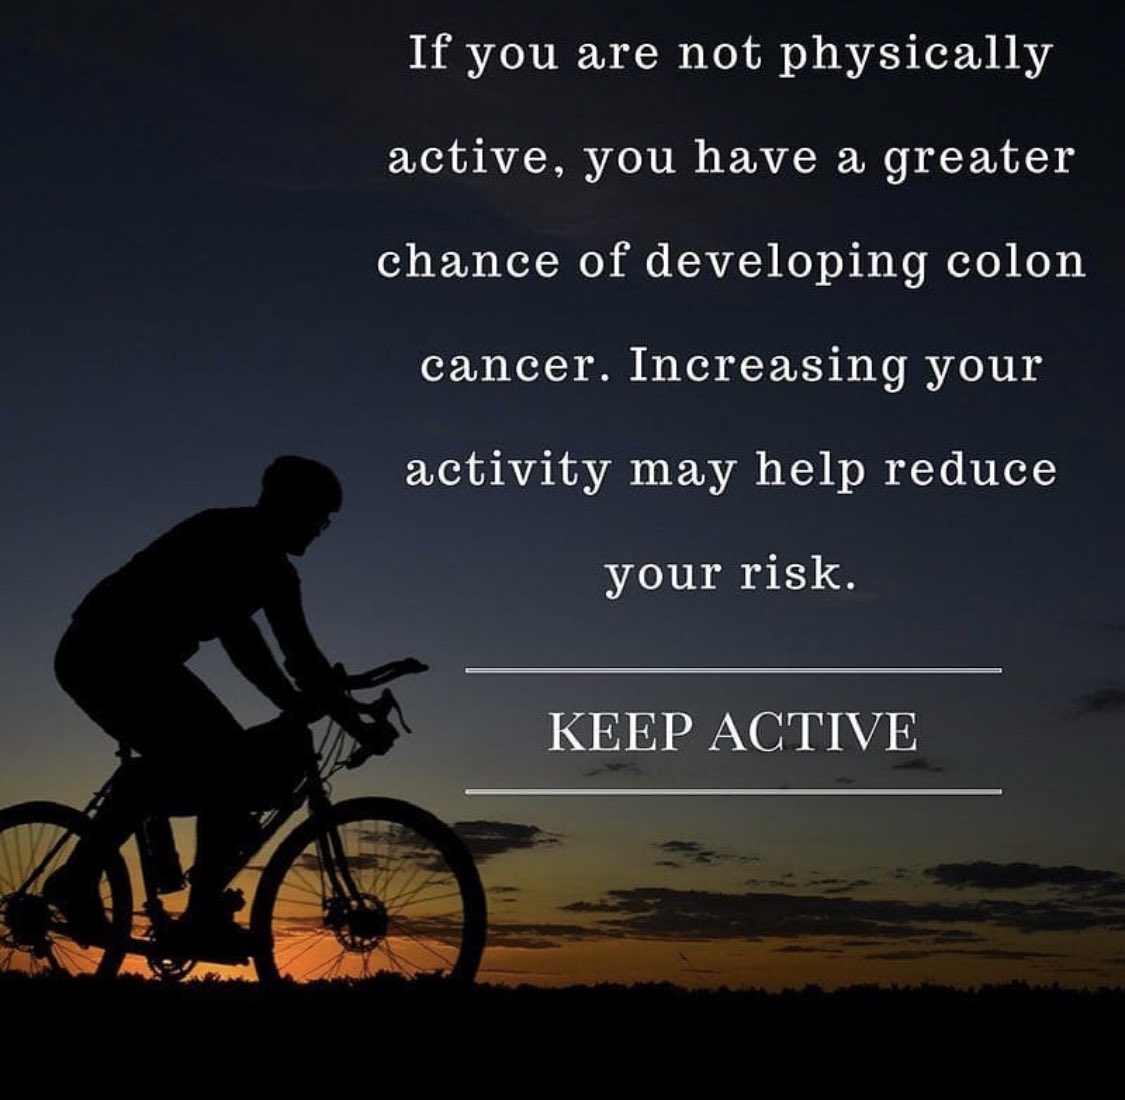 #WellnessWednesday: Make sure to stay active & allot time for physical activity—it may help reduce your risk for colorectal cancer 🚴

#keepfit #keepactive #exercise #colon #colorectalhealth #coloncancer #colorectalcancer #colorectalcancerawareness